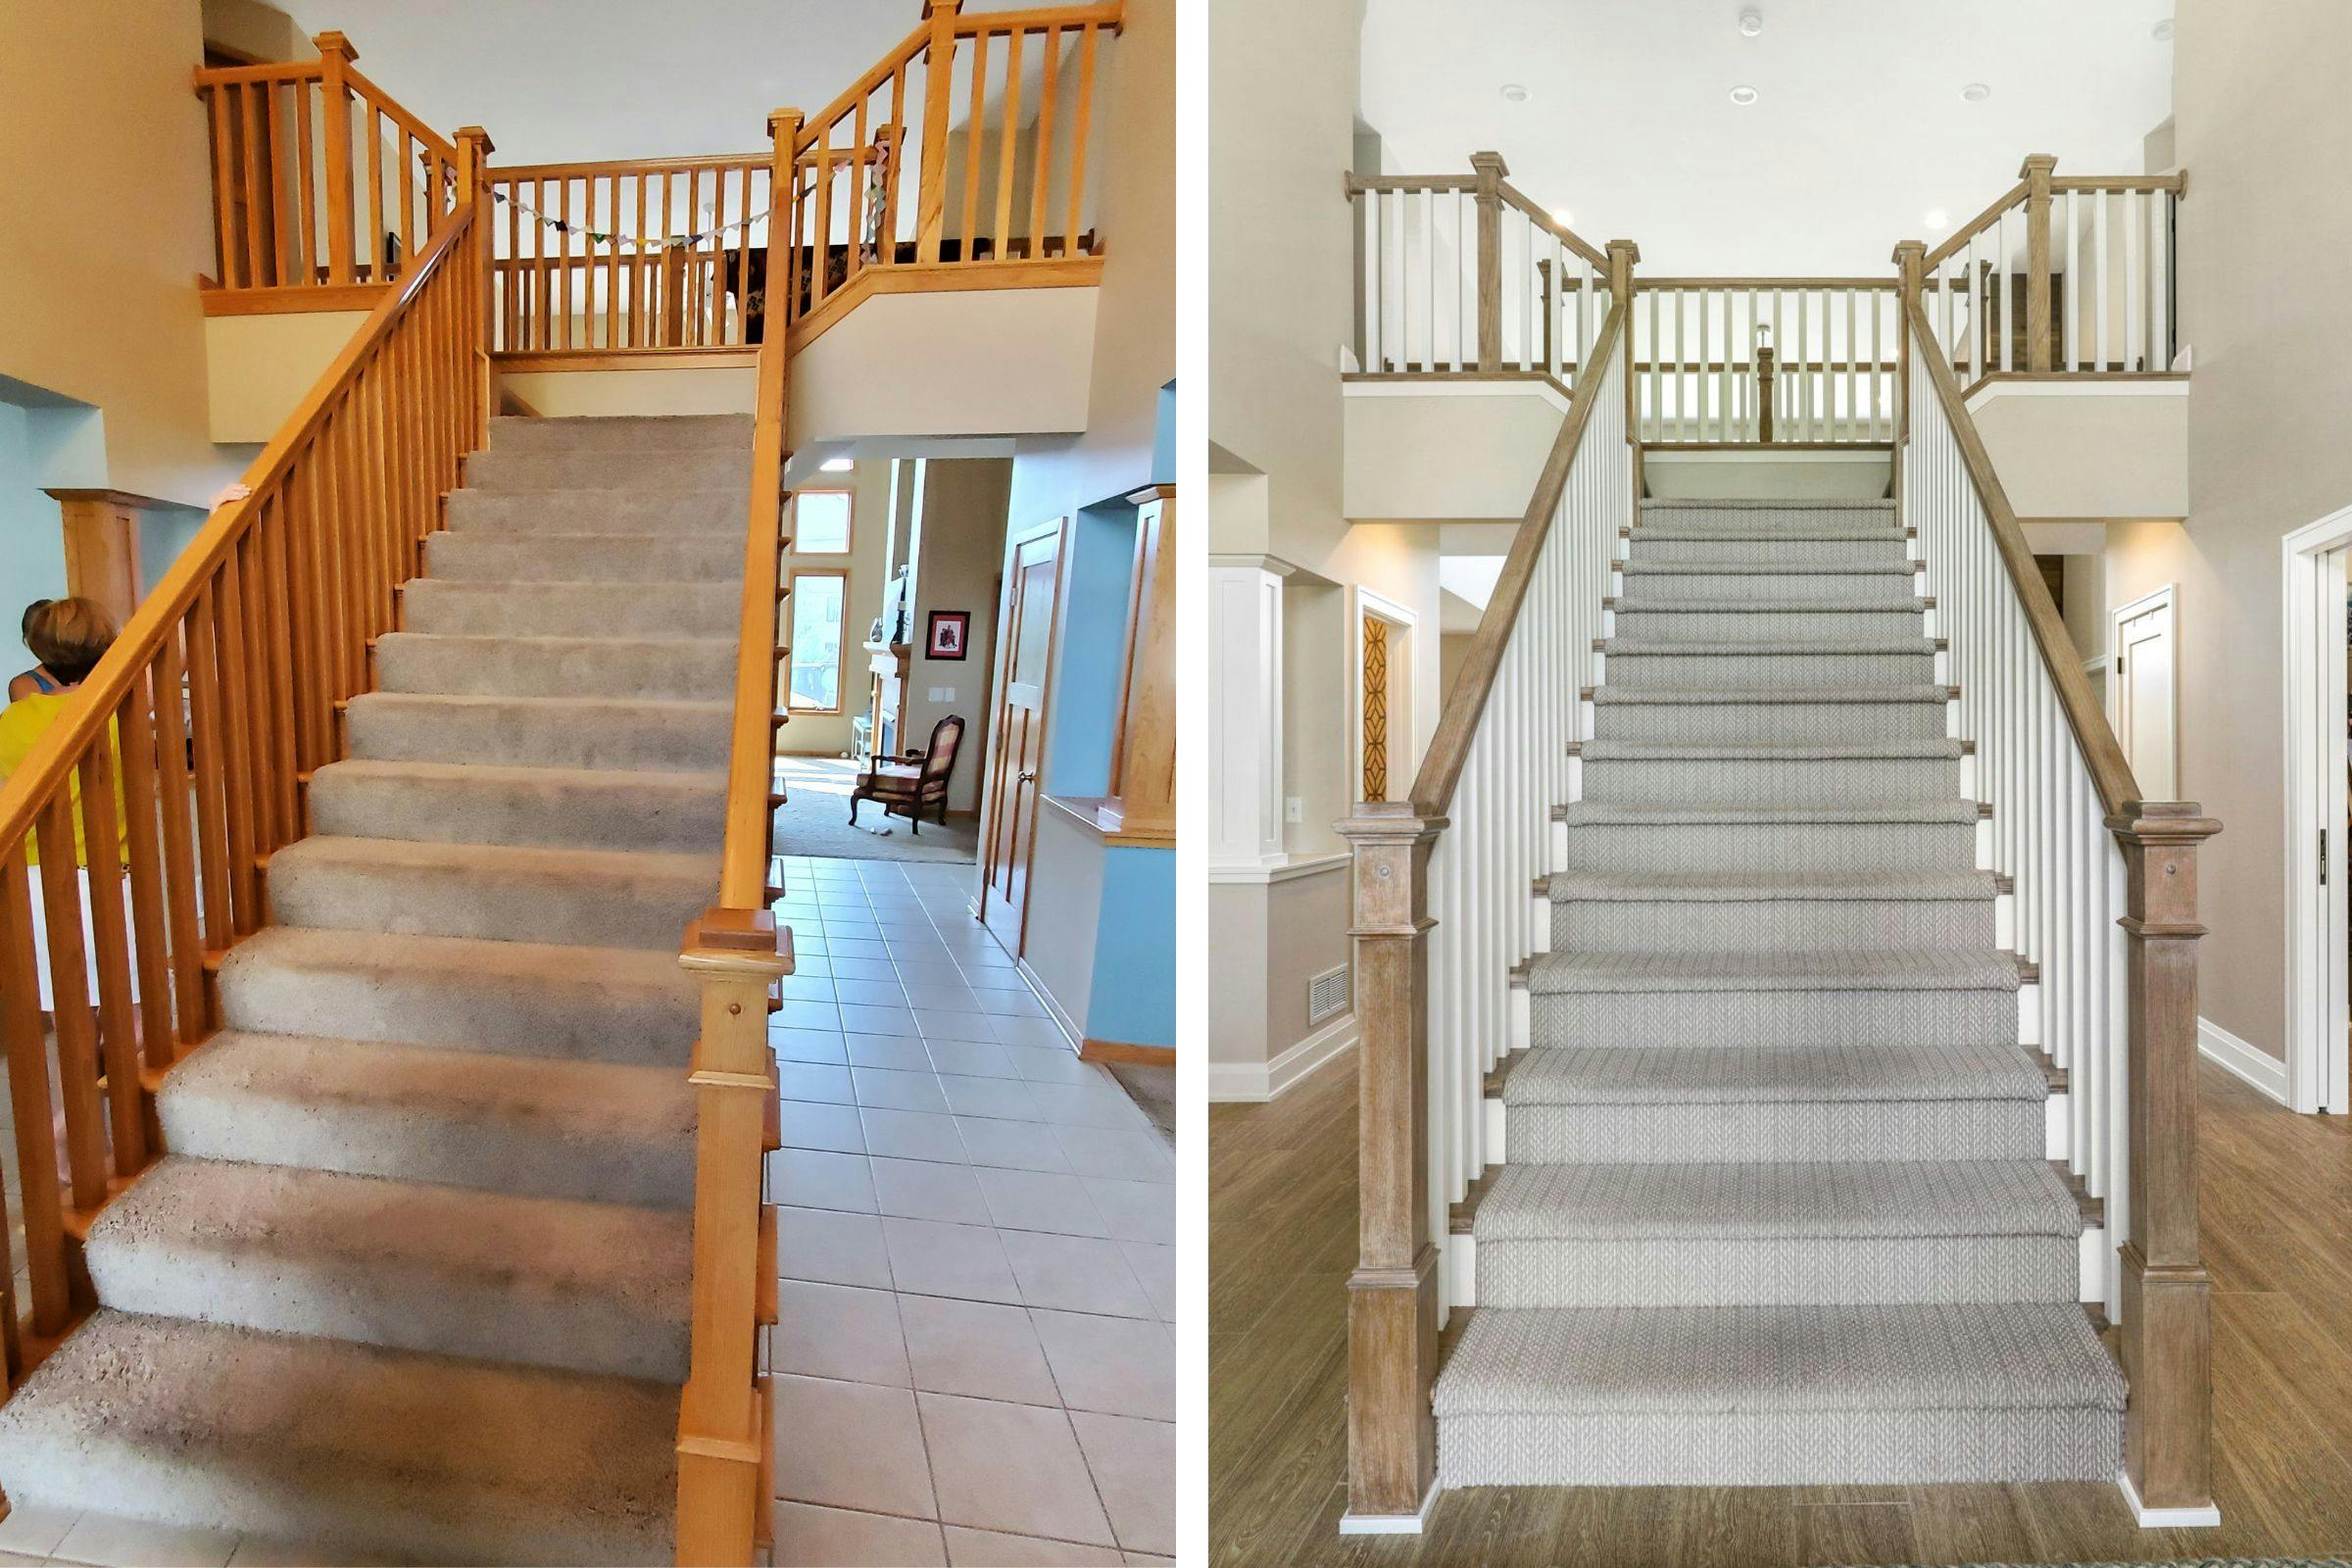 before and after comparison of the staircase